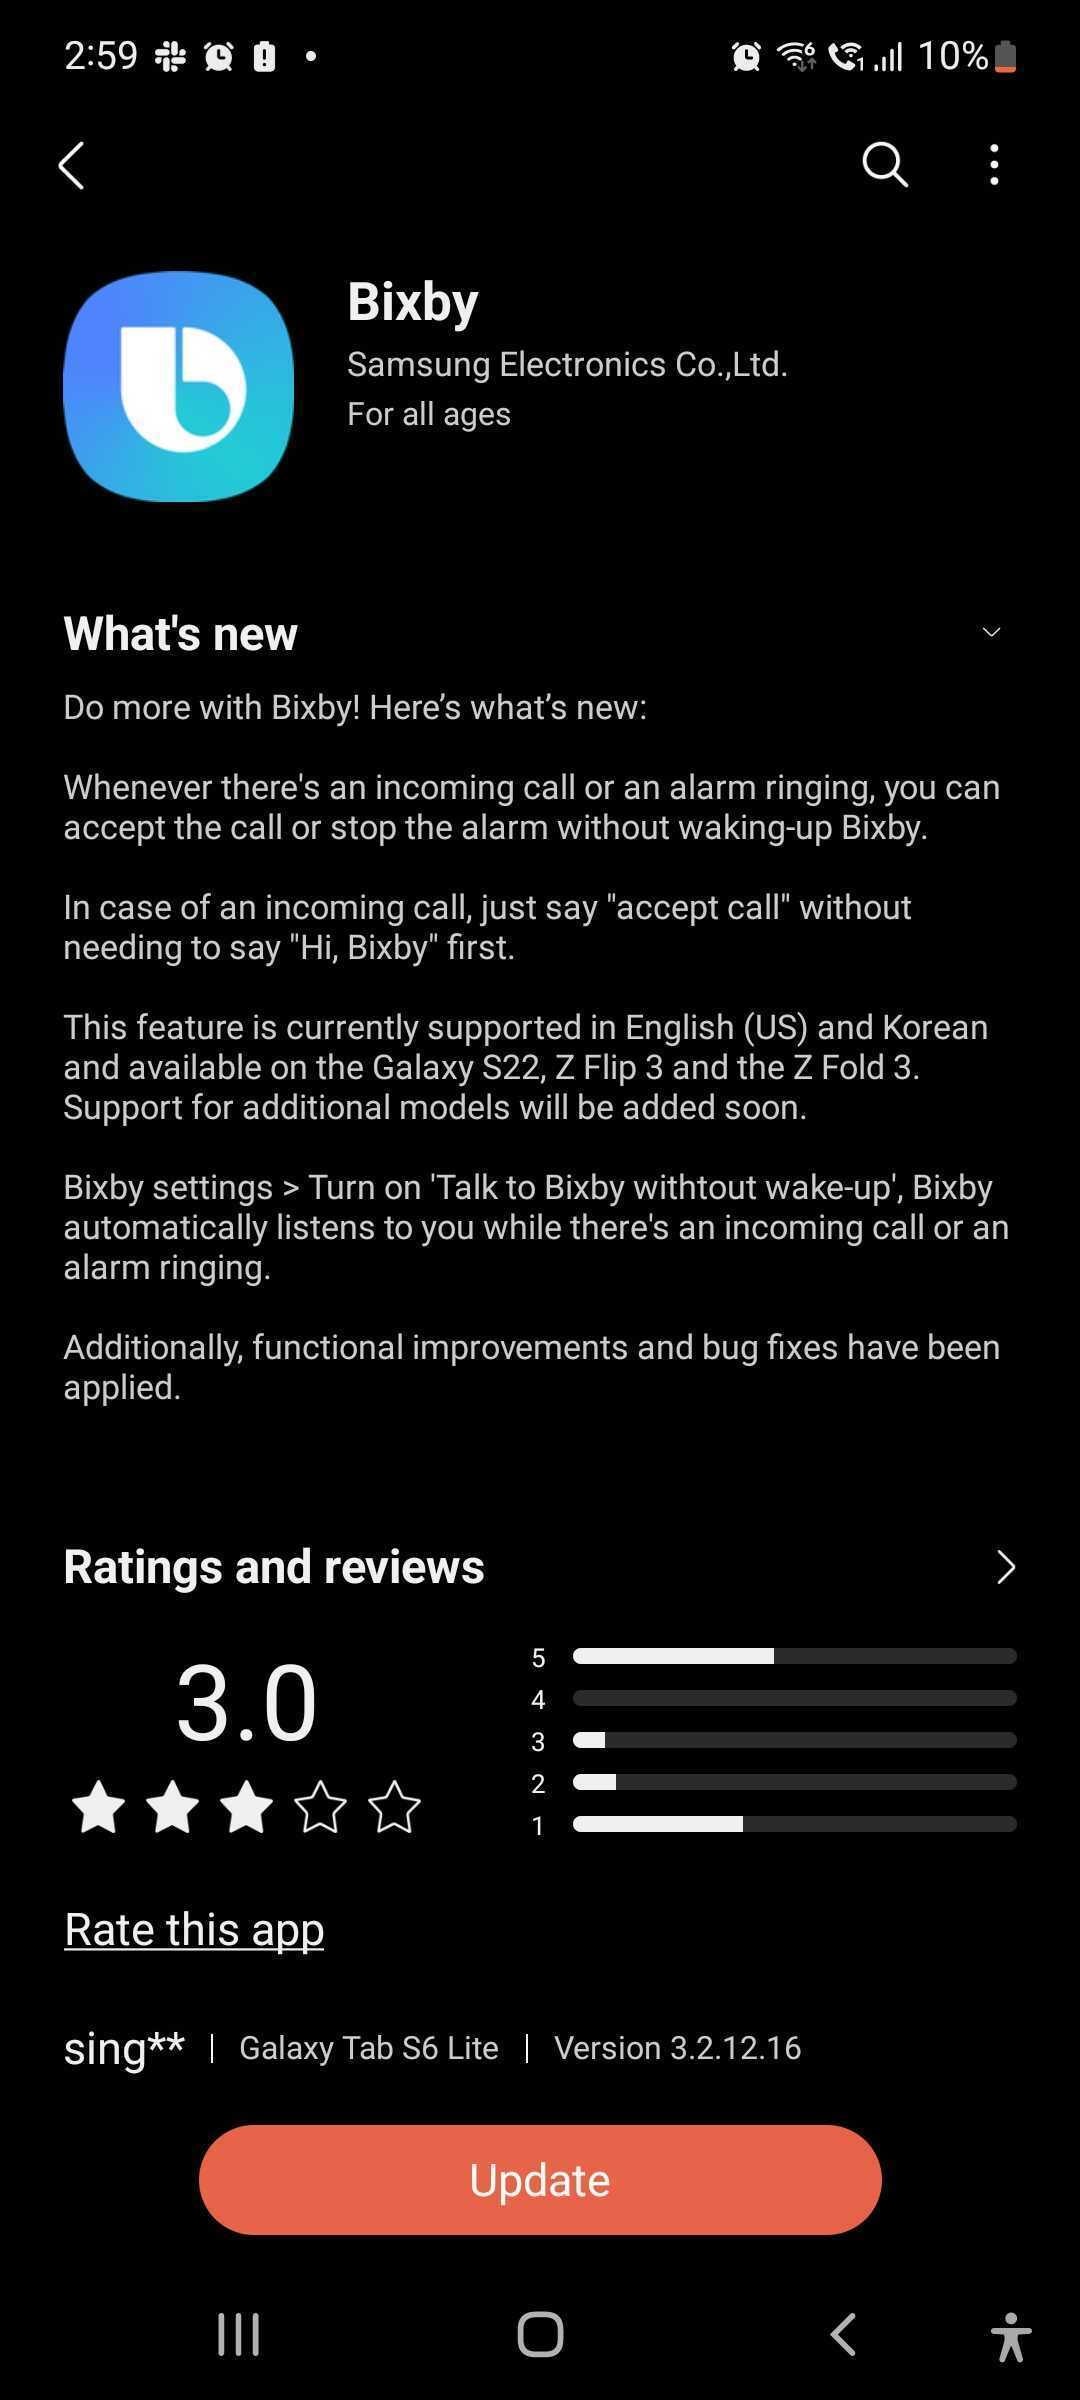 Samsung&#039;s Bixby digital assistant receives an update - Update to Bixby makes it quicker and easier to answer some Samsung Galaxy phones hands-free